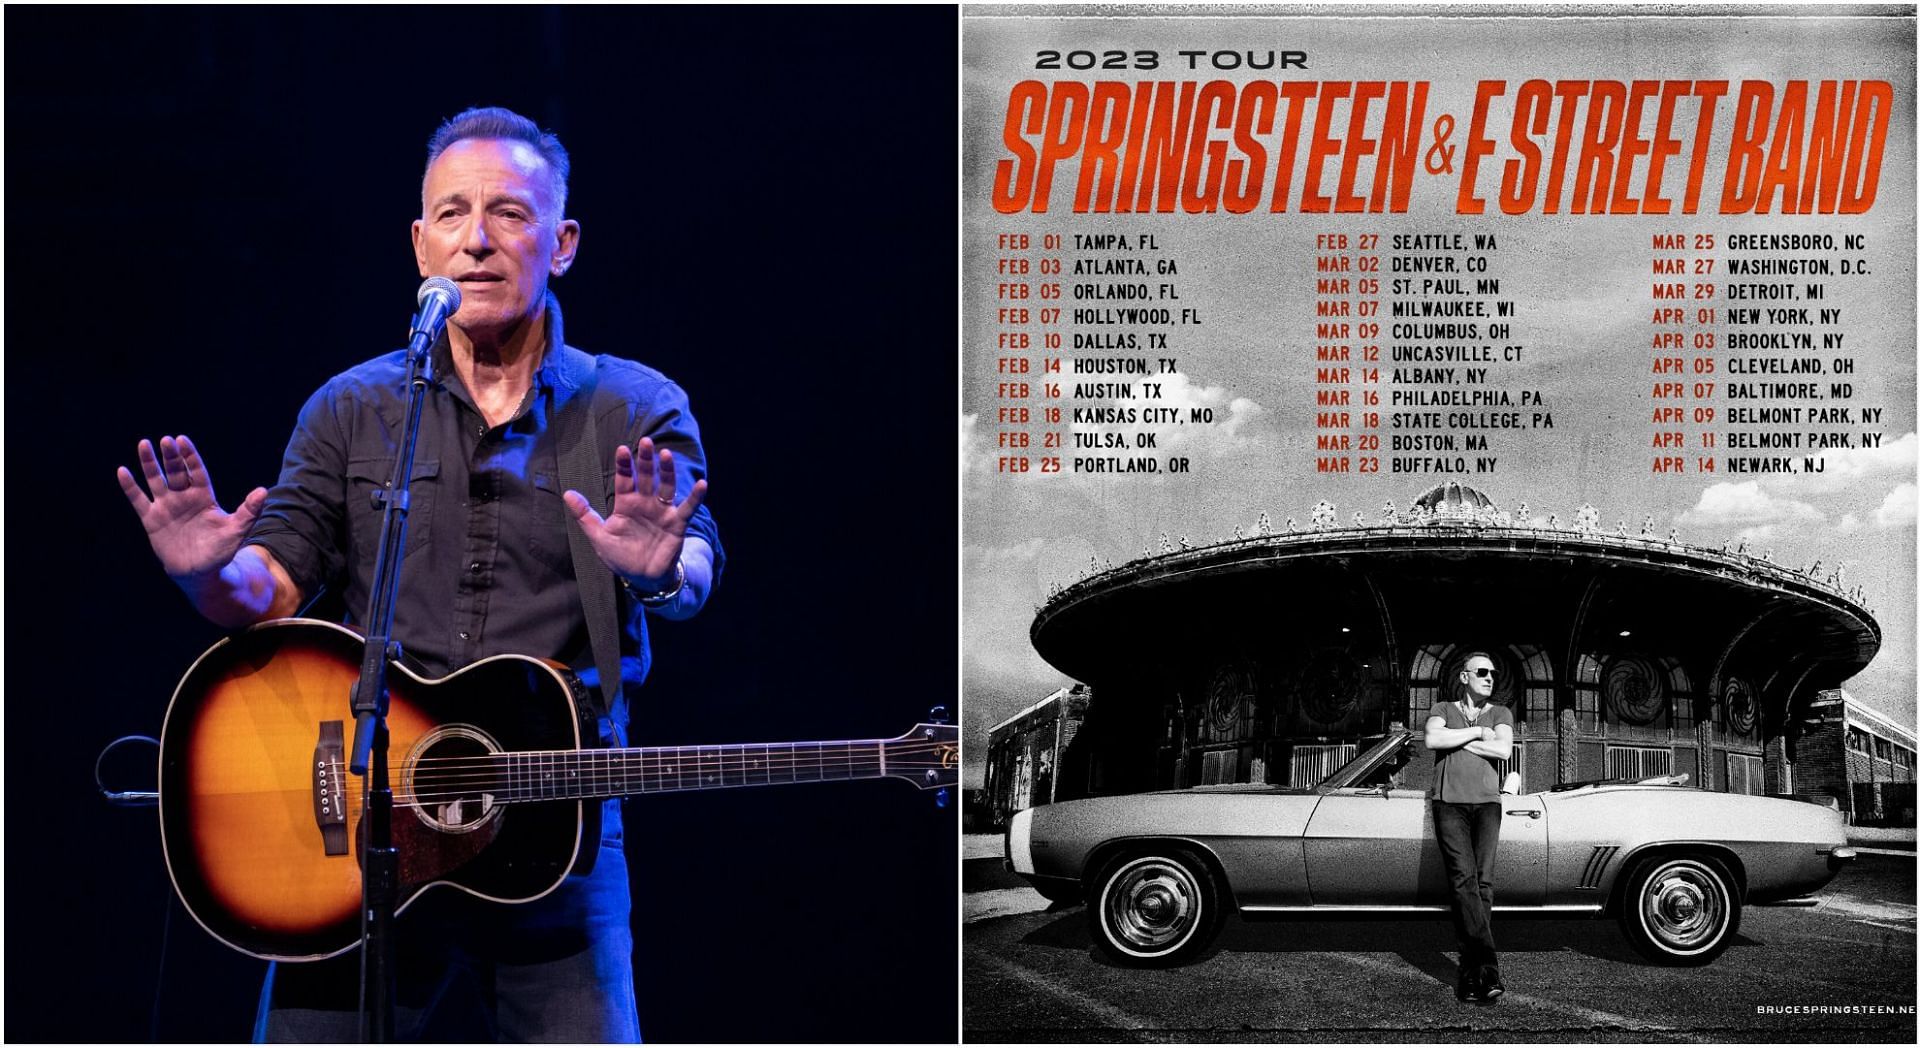 AMEX Bruce Springsteen Presale Get Your Tickets Now! My WordPress